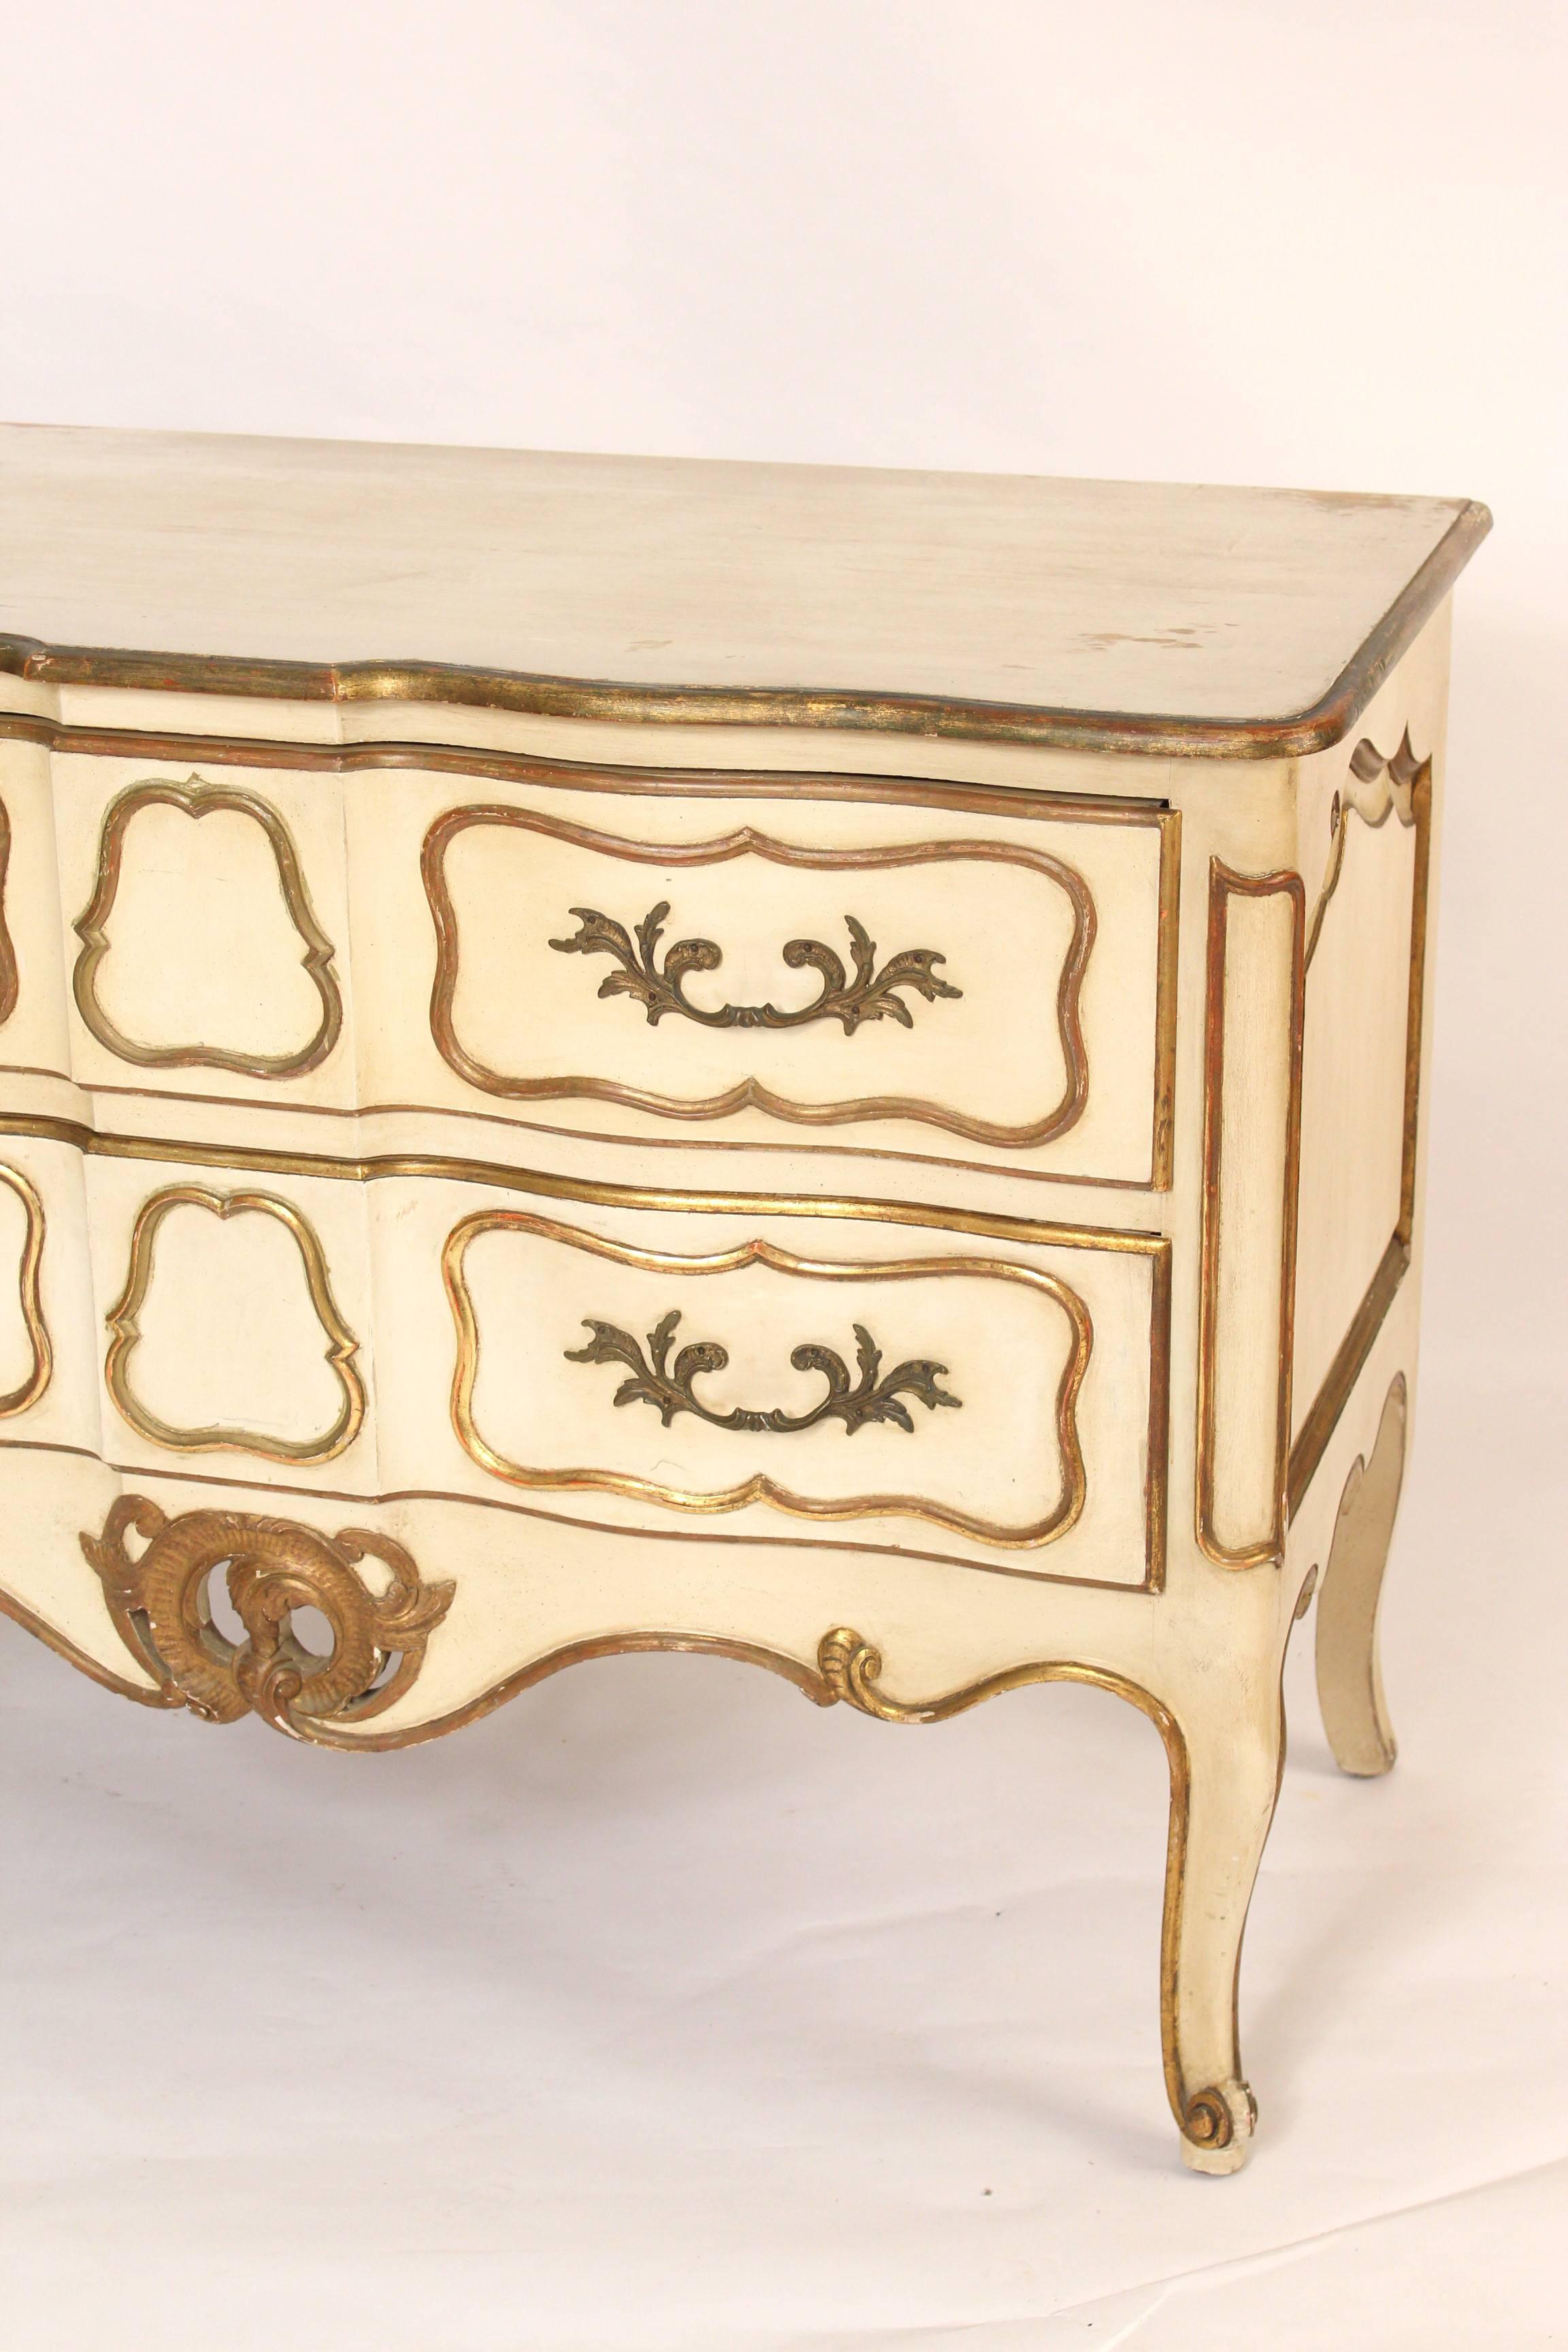 Painted Louis XV Provincial style chest of drawers, with nice quality gilt decoration, circa 1960. The drawers are hand dovetailed and made of solid oak. As can be seen in the photographs the top finish is rubbed.